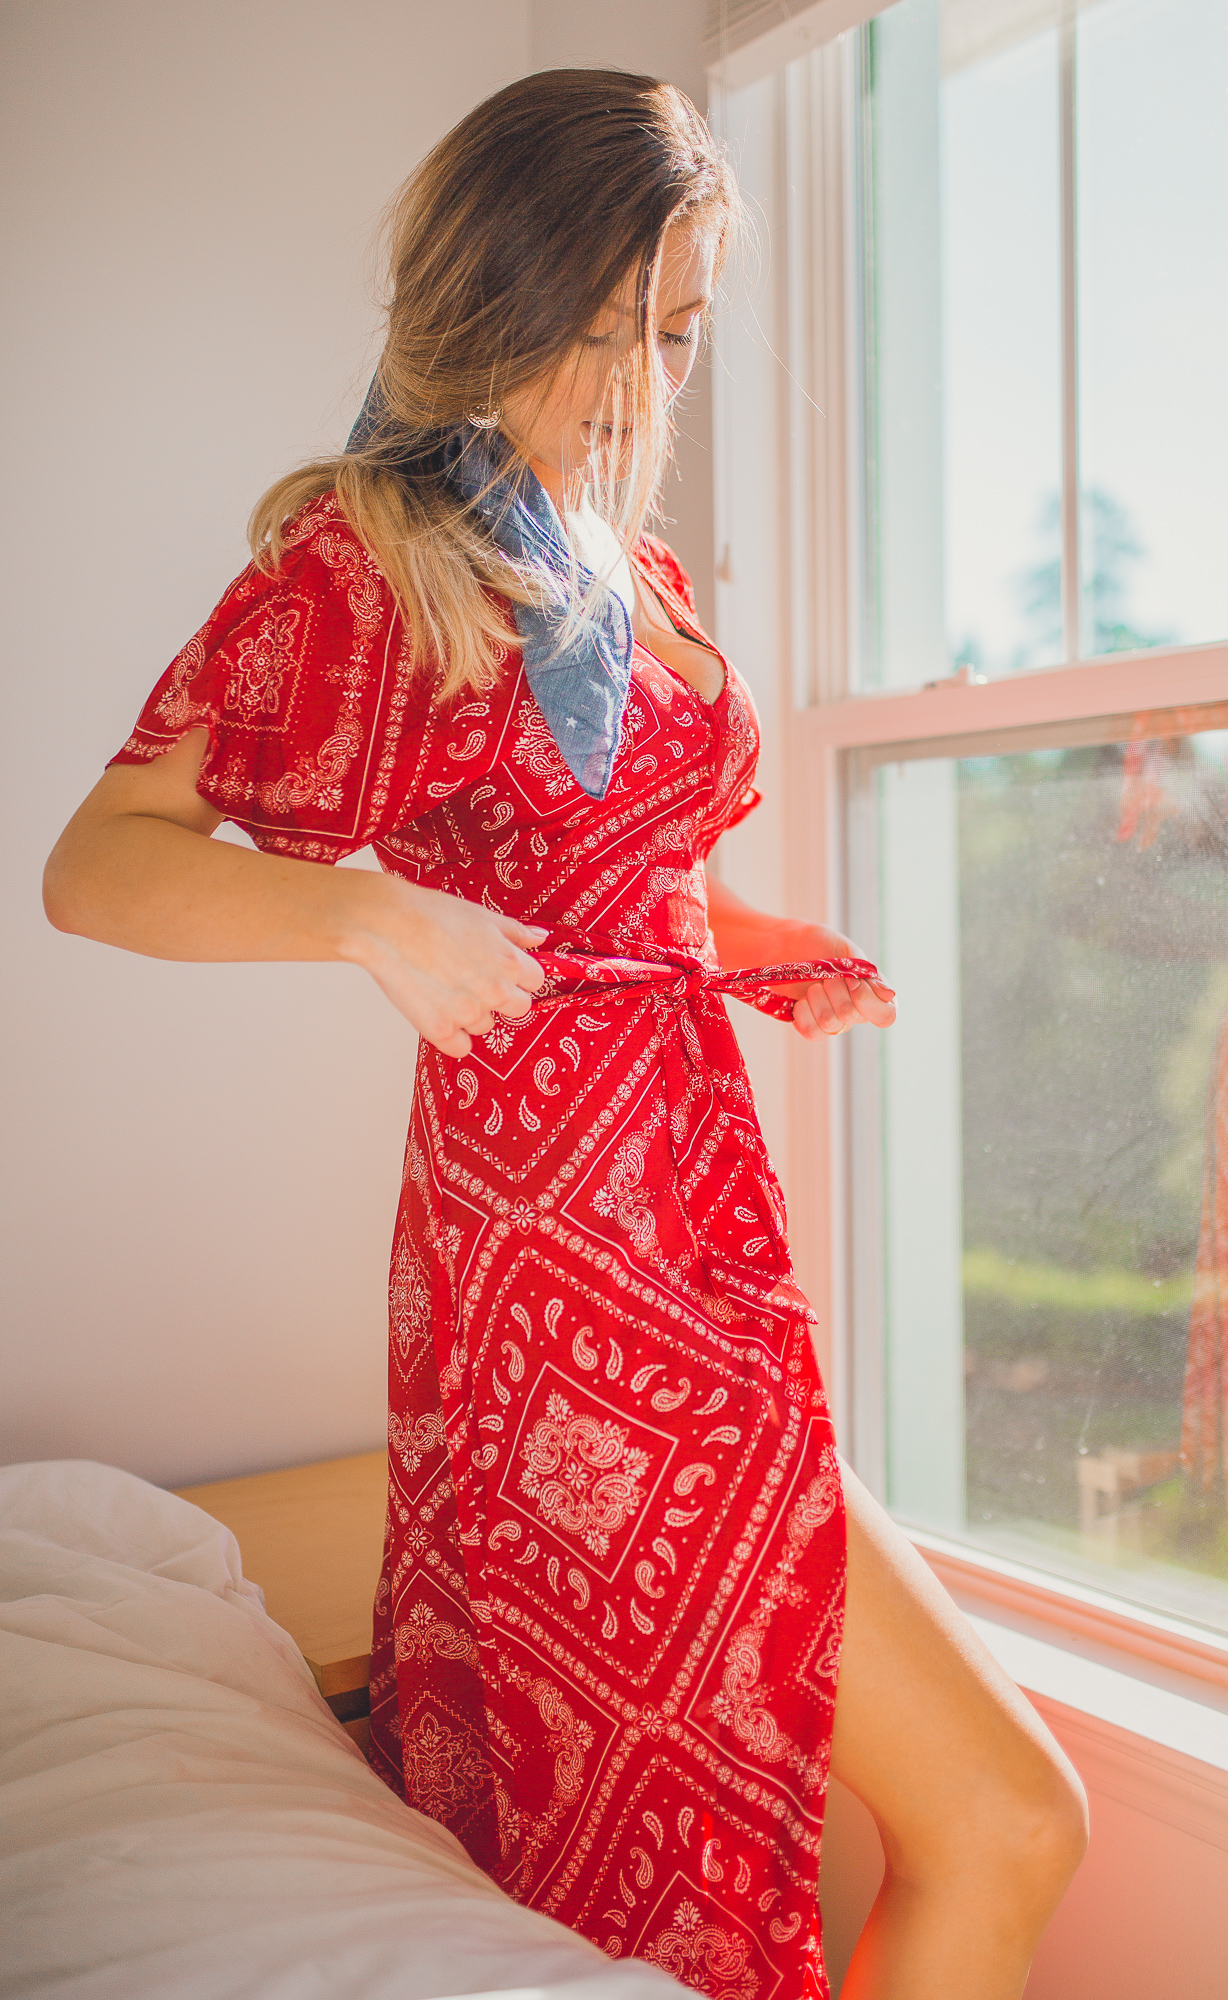 Red Bandana Print Dress from Forever21. Fashion inspiration by popular North Carolina lifestyle blogger Jessica Linn from Linn Style.